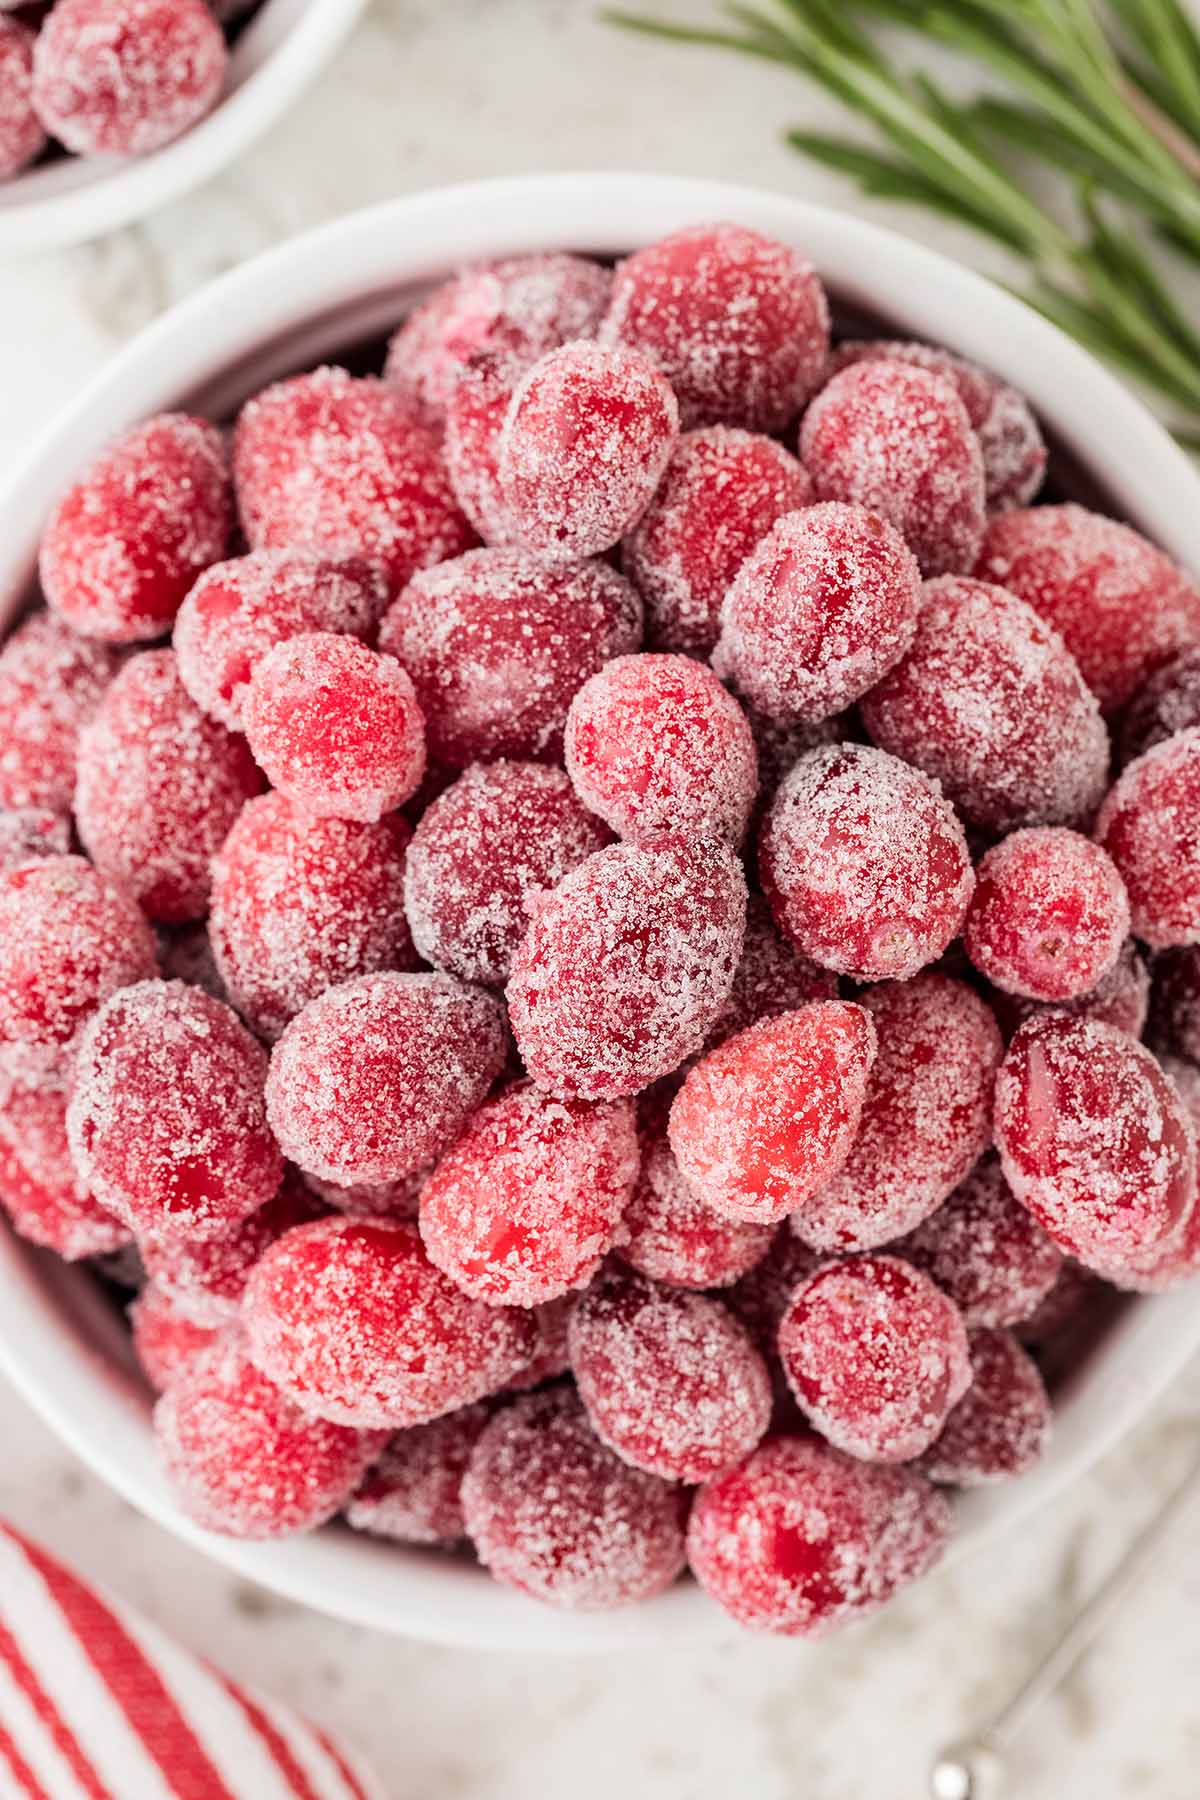 Sugared Cranberries in a white bowl with striped napkin in the background.